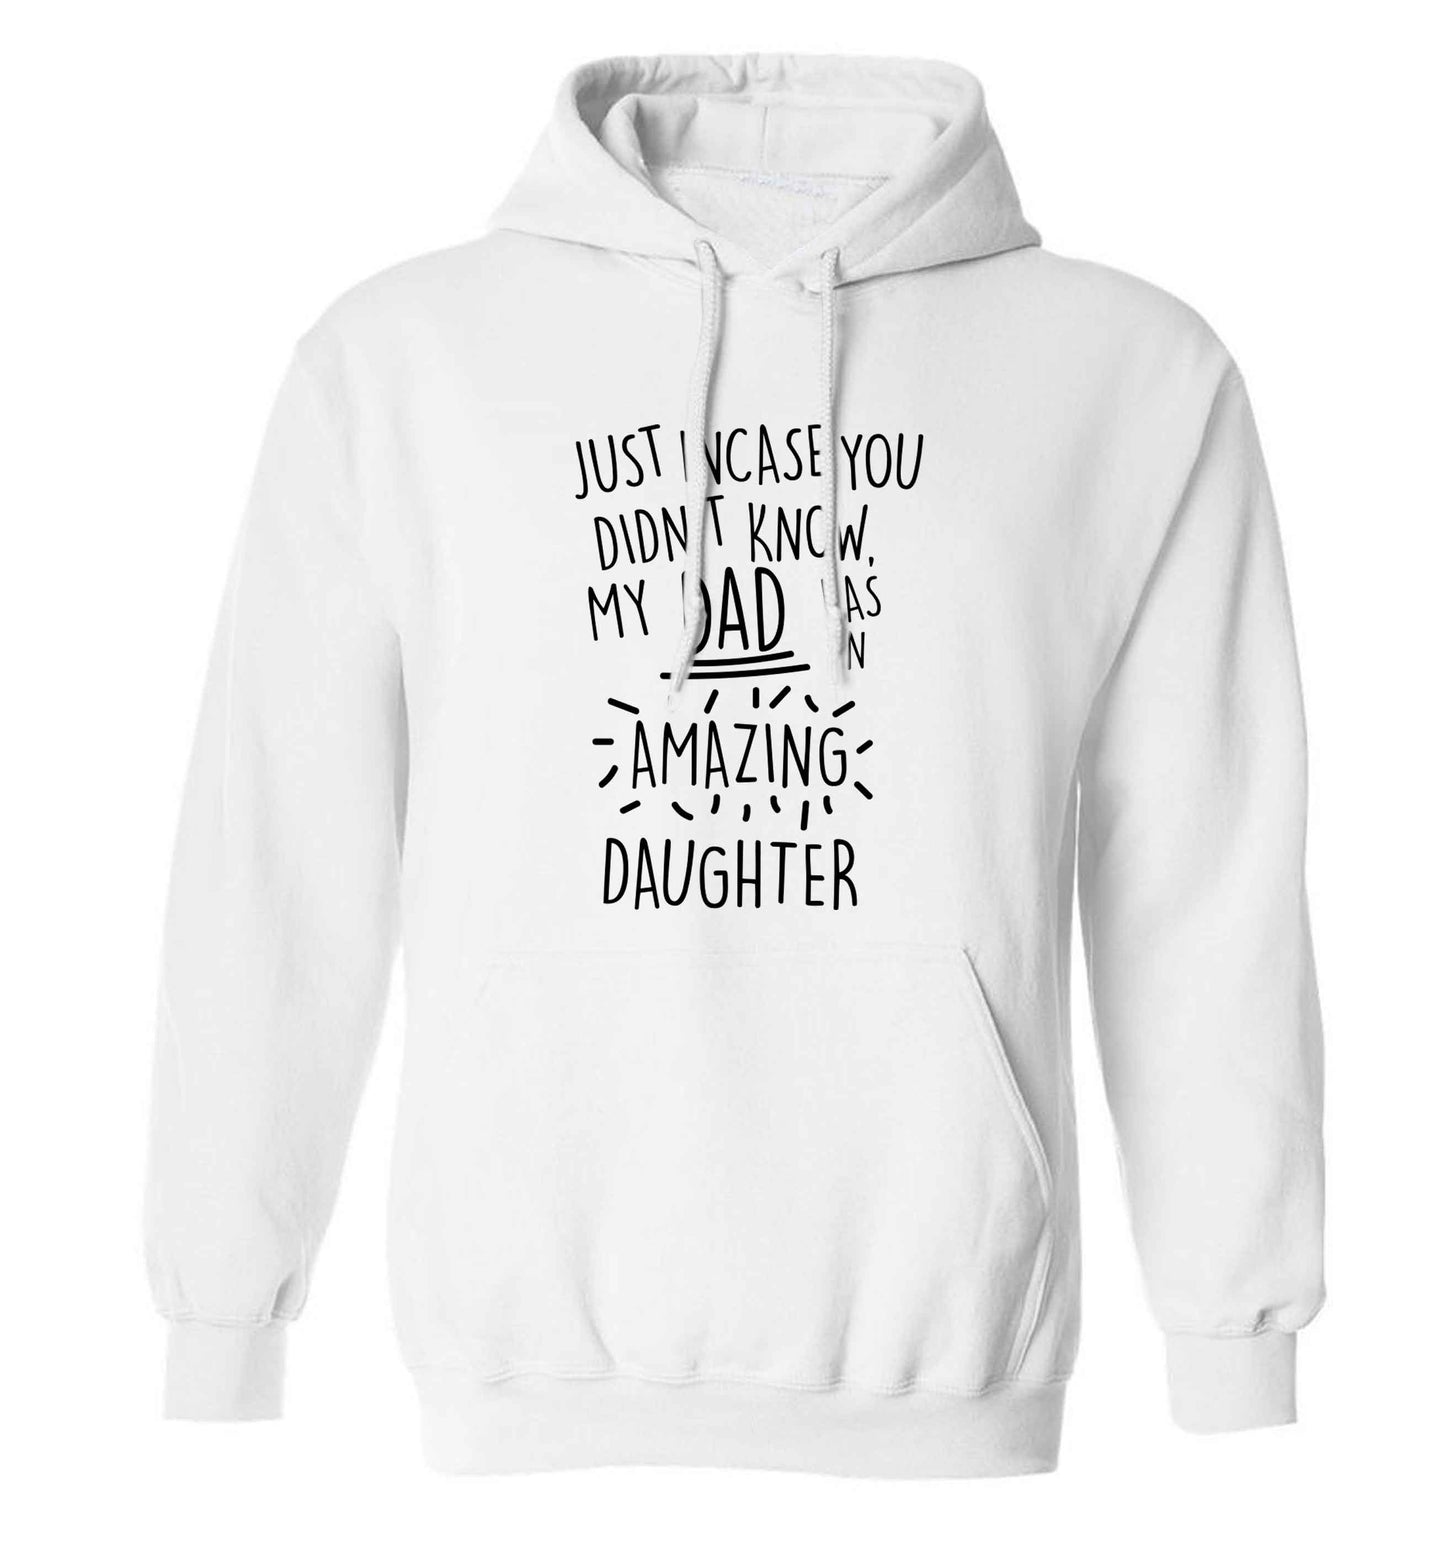 Just incase you didn't know my dad has an amazing daughter adults unisex white hoodie 2XL